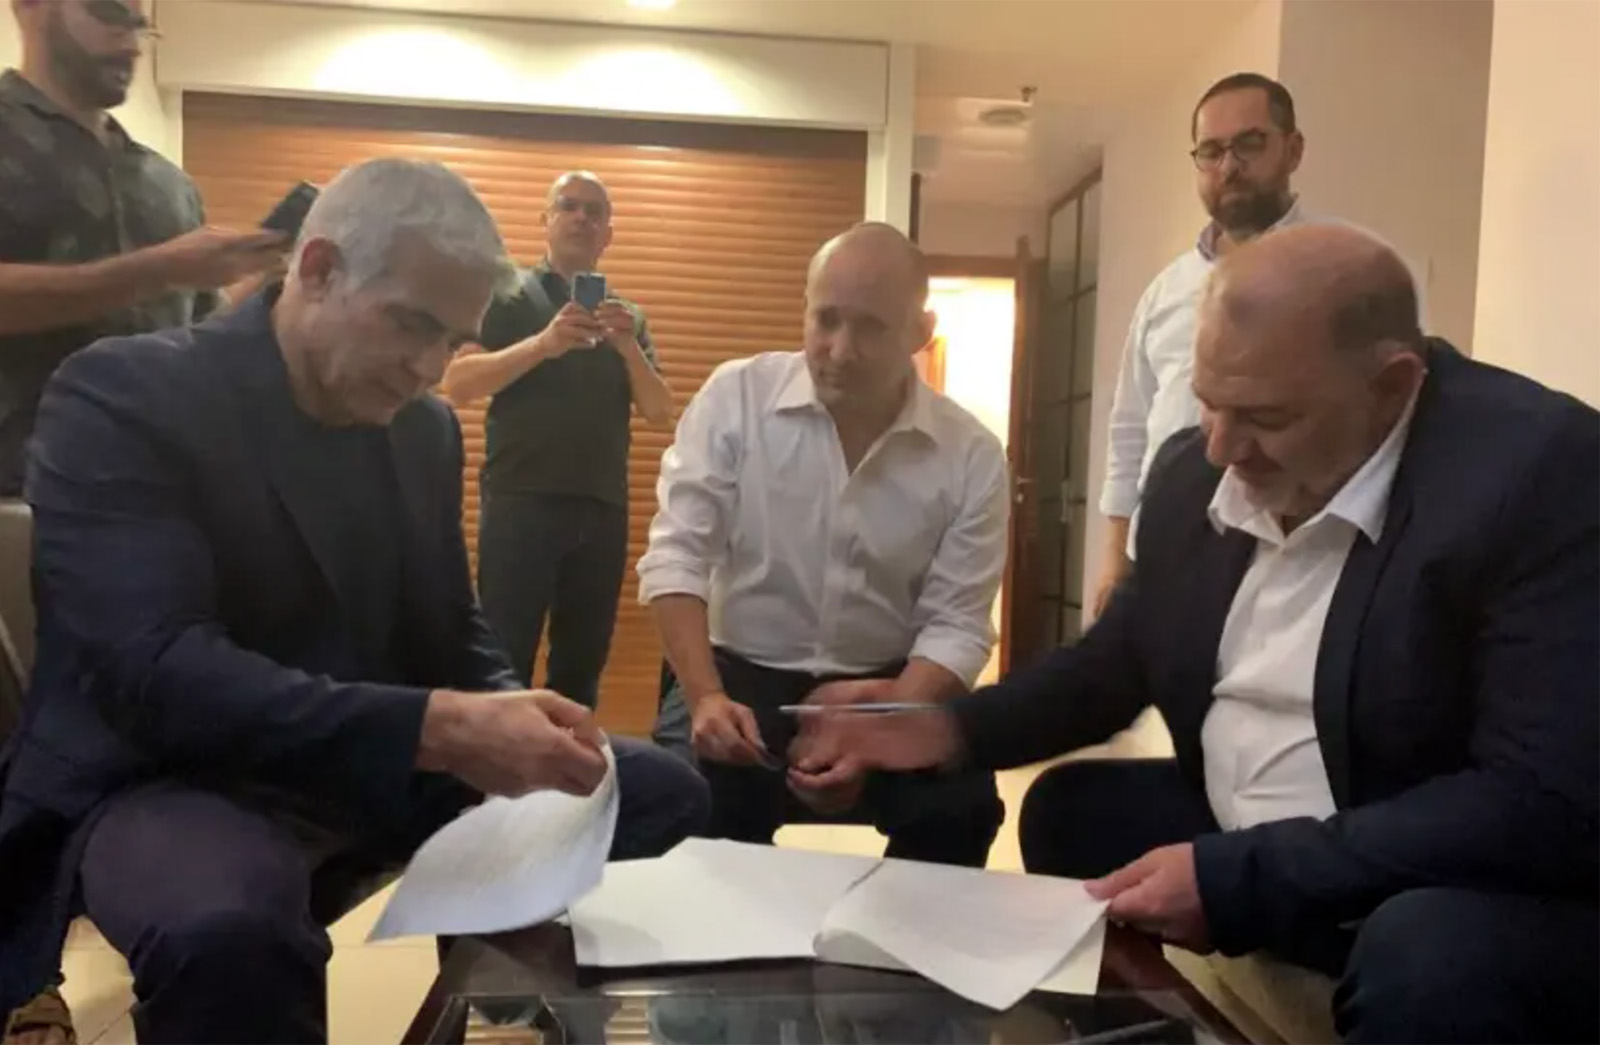 Yair Lapid, from left, Naftali Bennett, and Mansour Abbas are seen signing a coalition deal. (Photo credit: RA'AM, via social media)